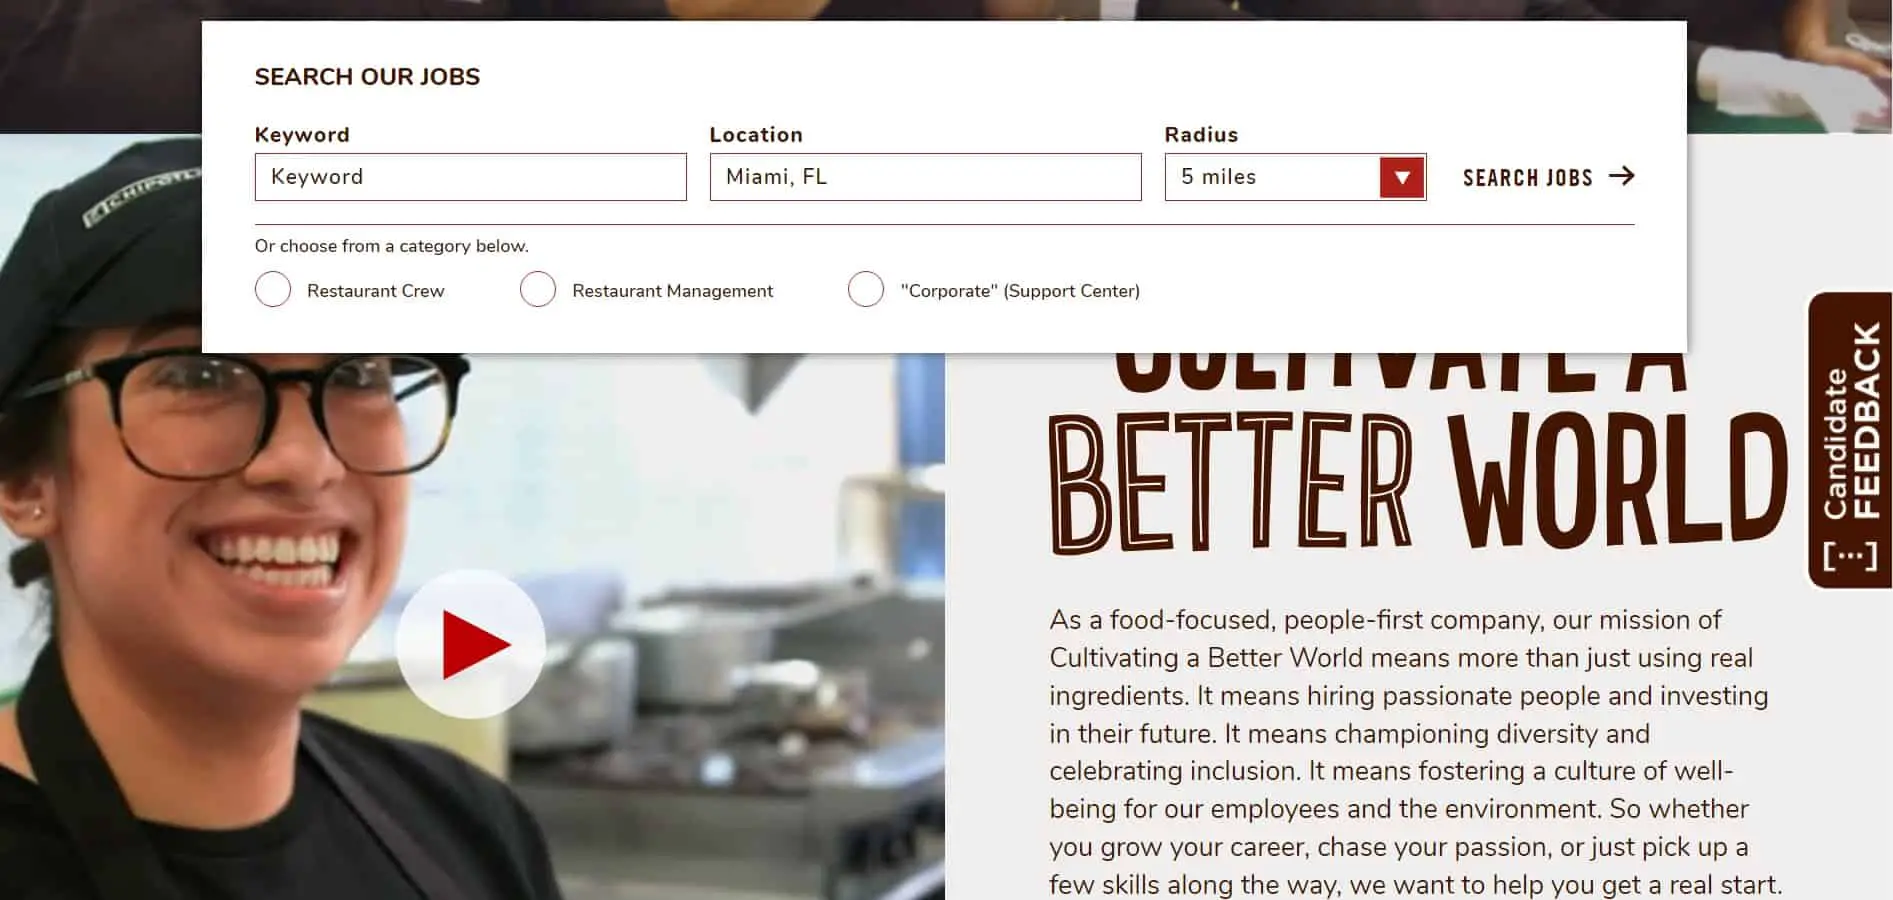 See how to apply for a job at Chipotle and have the best chance to get hired.